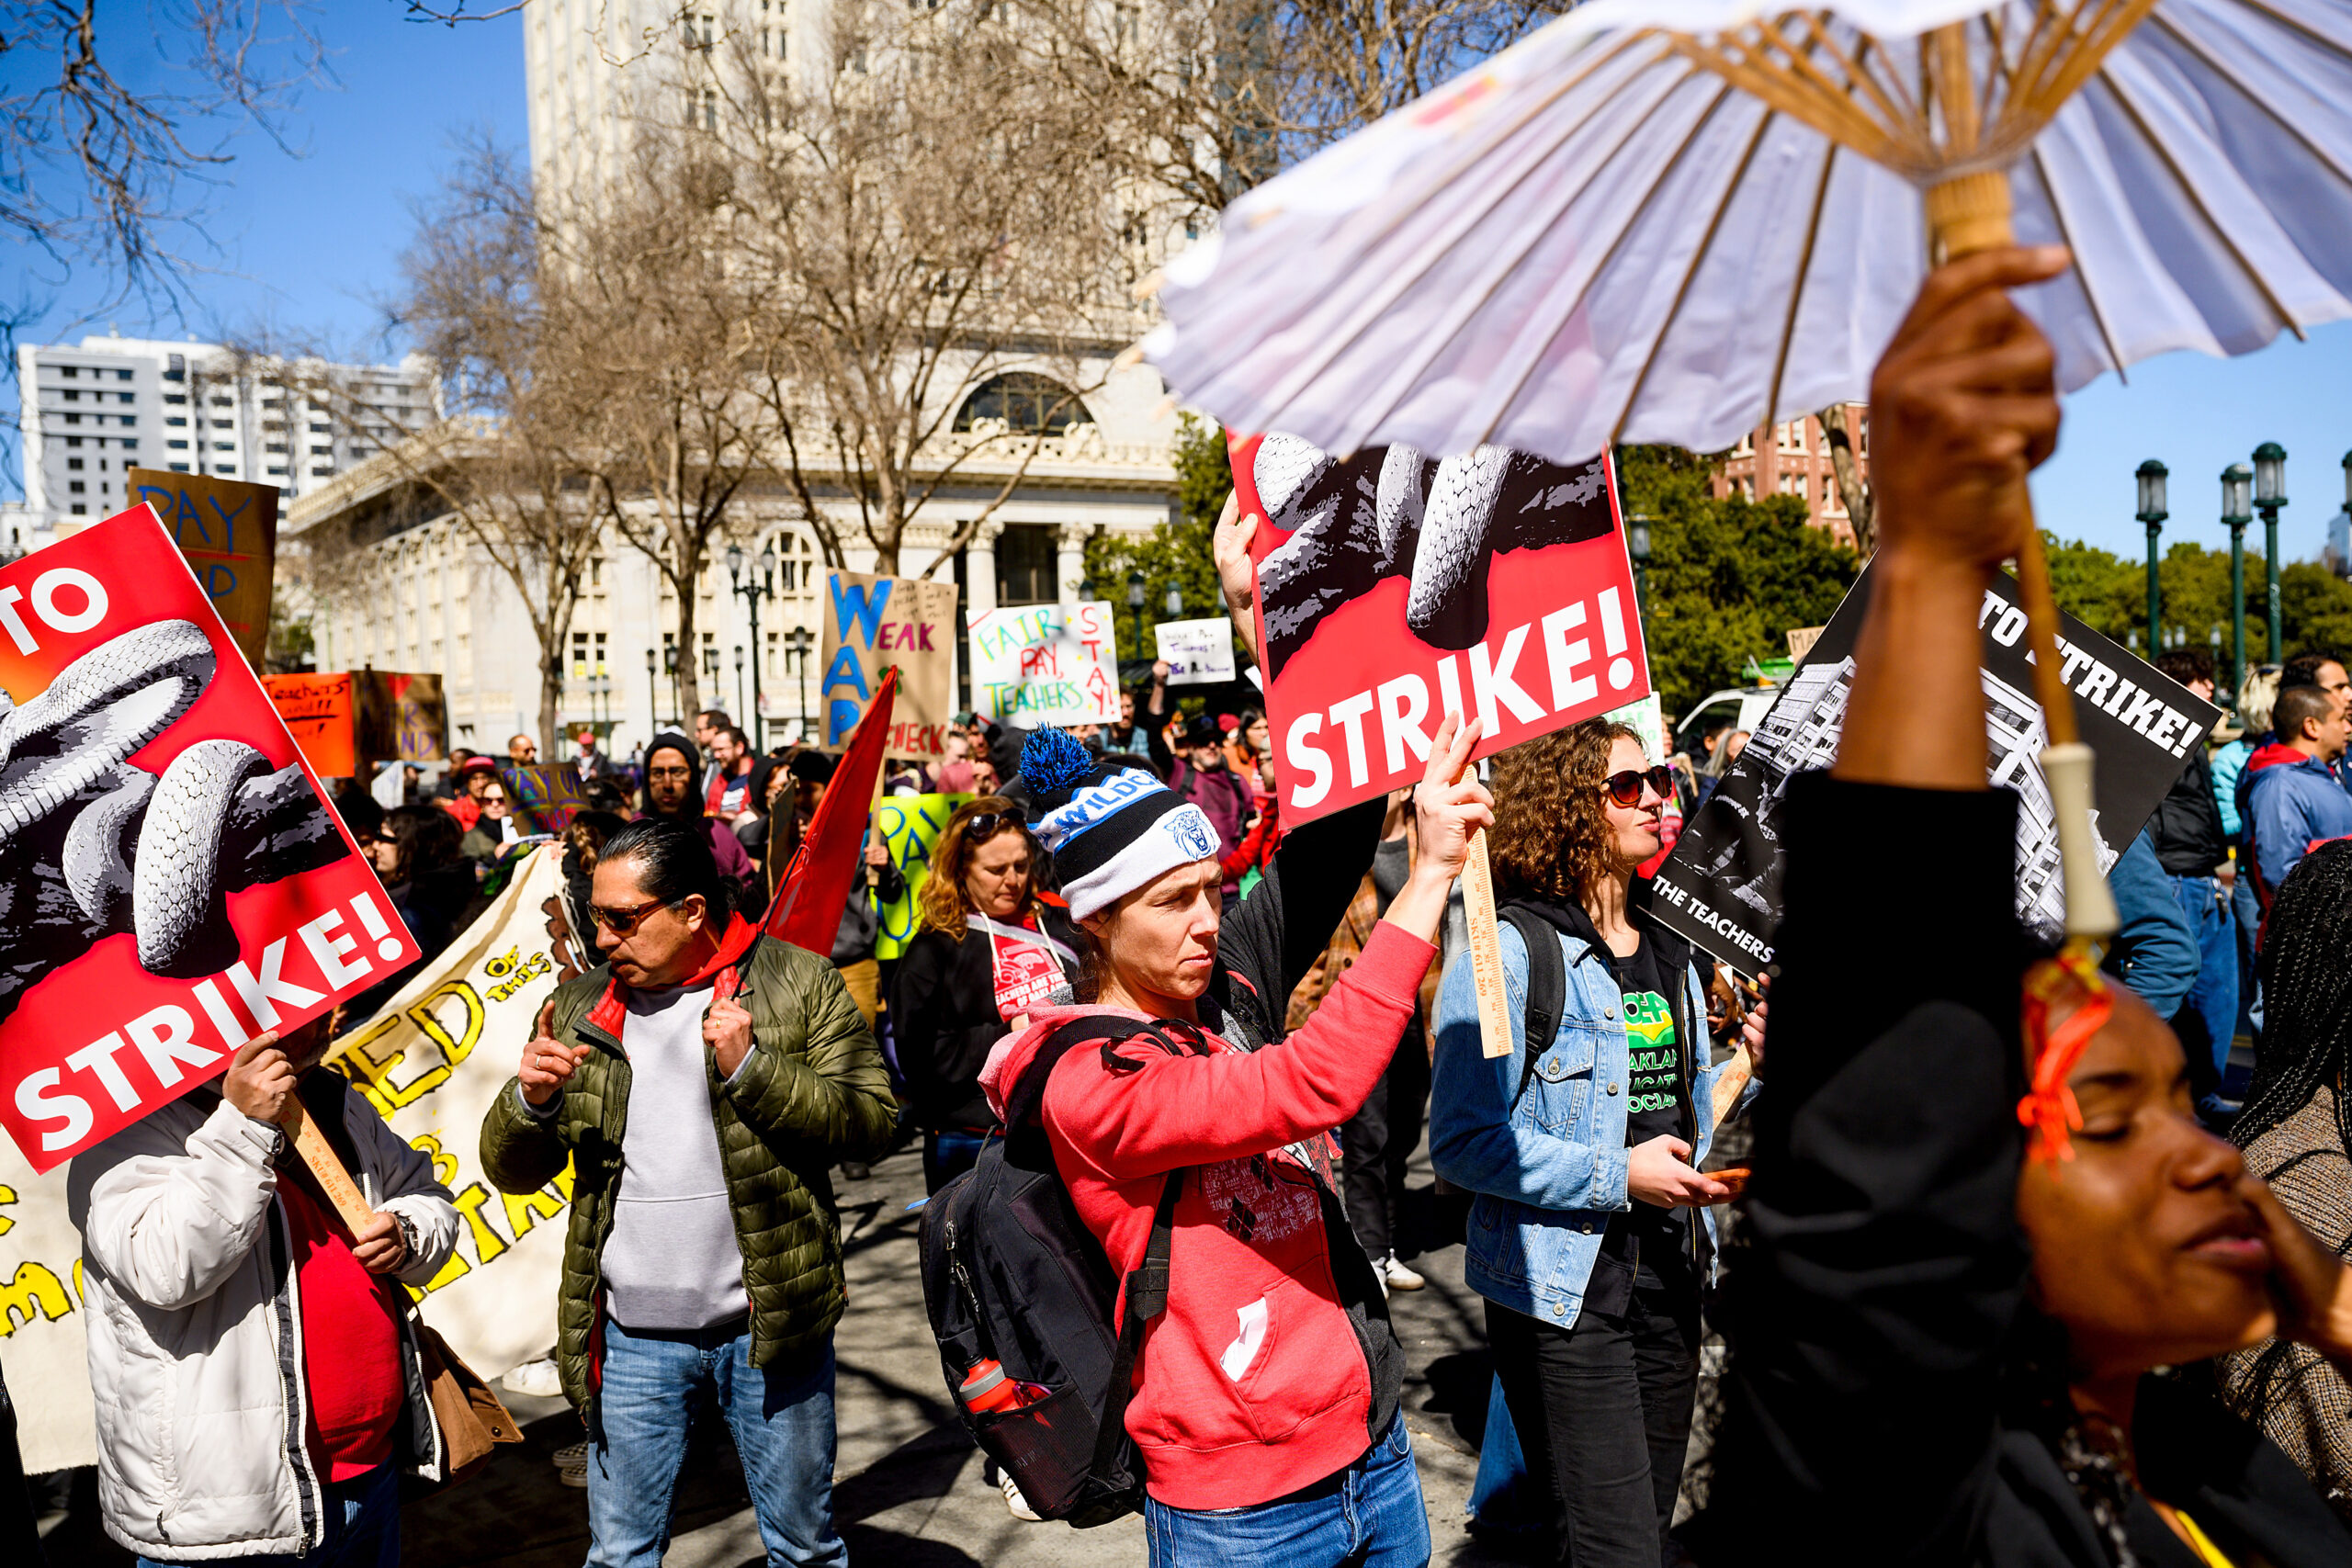 Oakland Teachers Walk Out Over Drawn Out Labor Talks